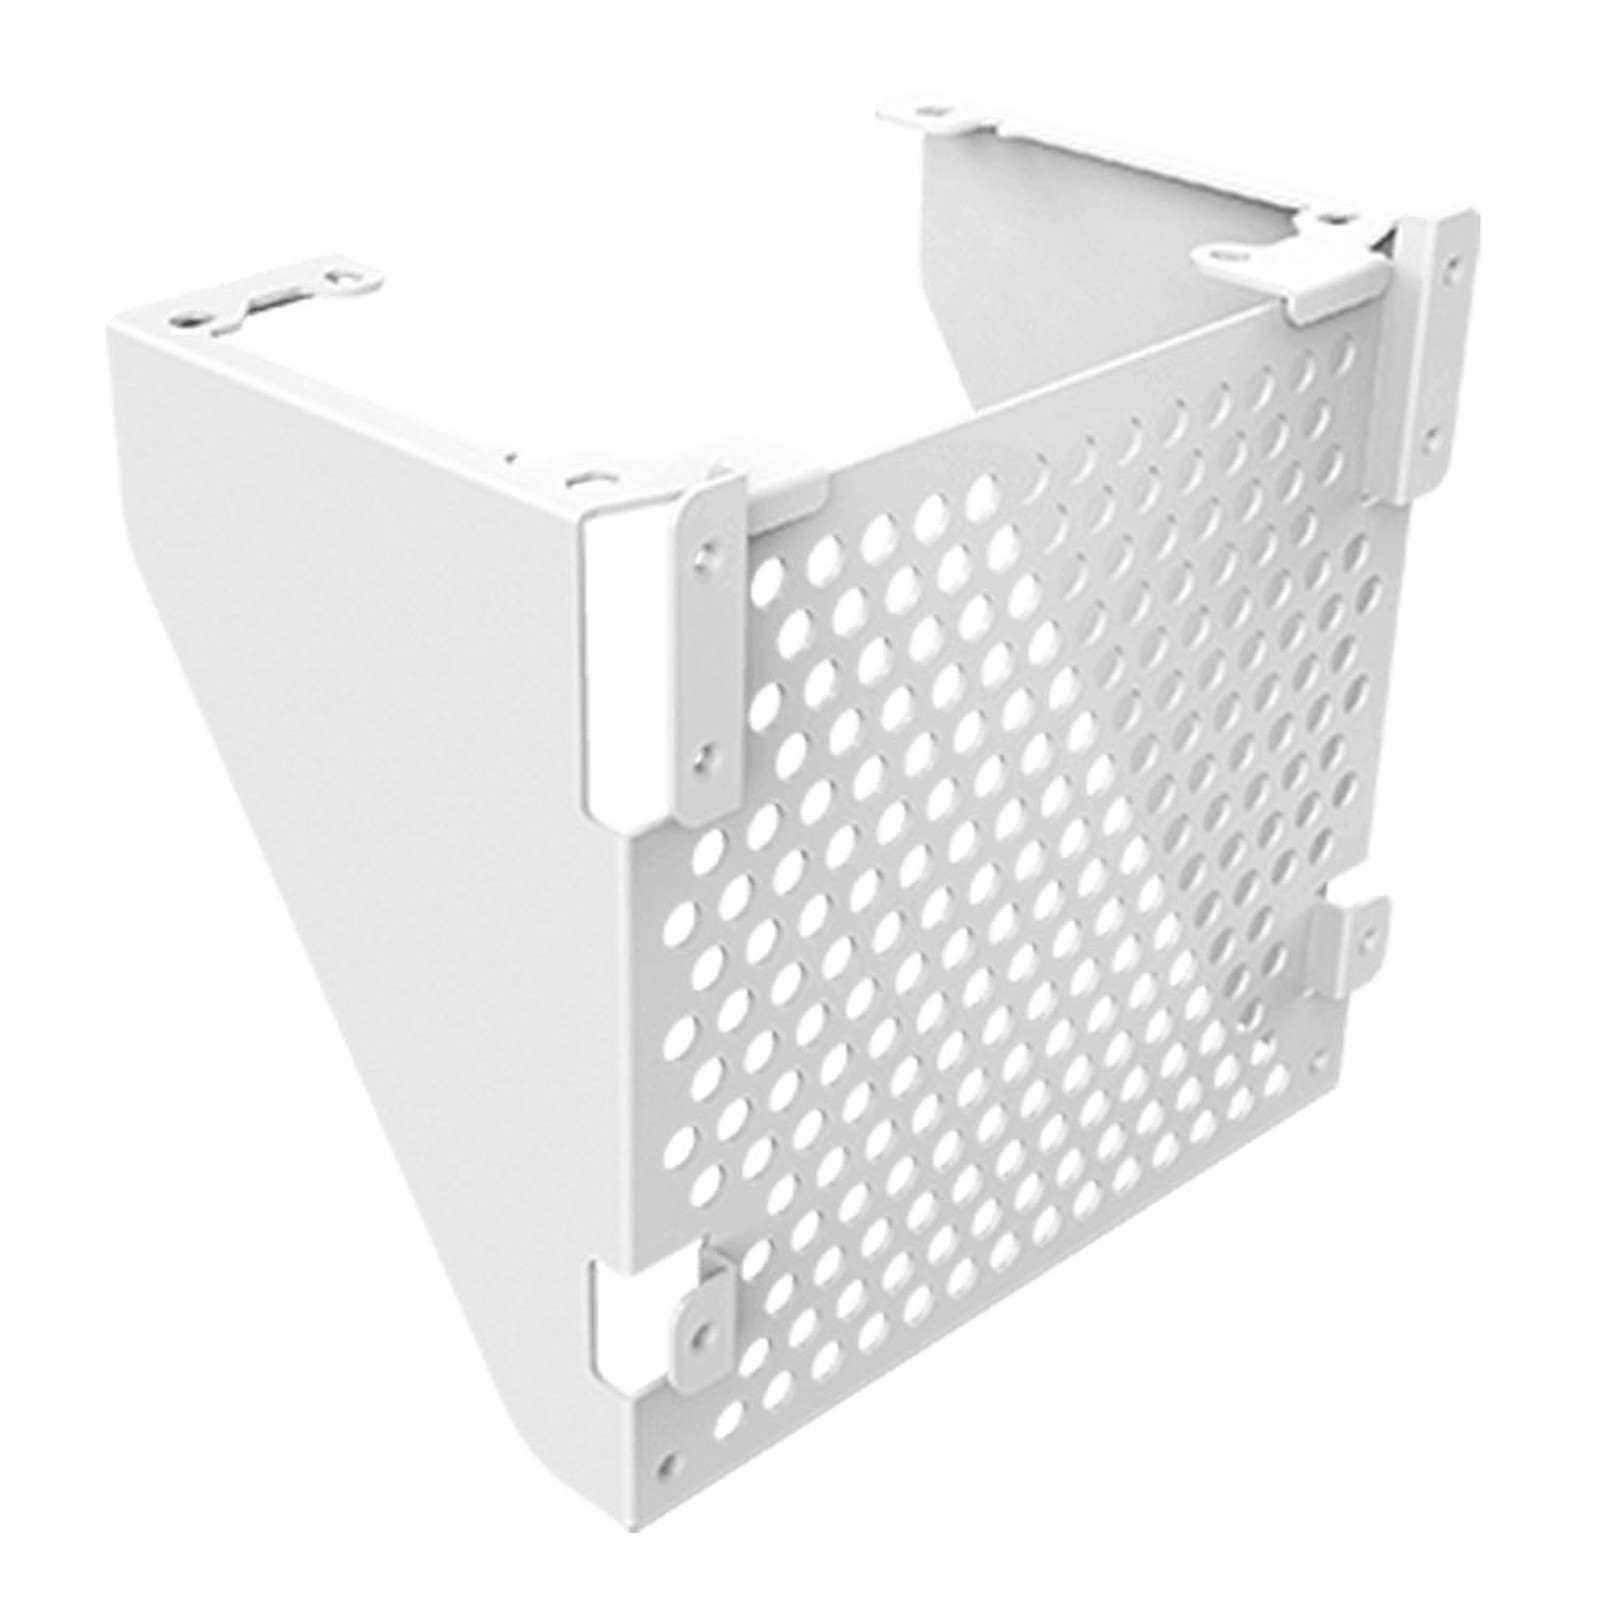 Cooler Master NR200C Support alimentation ATX - Blanc - Accessoires divers boitier Cooler Master Ltd - Occasion